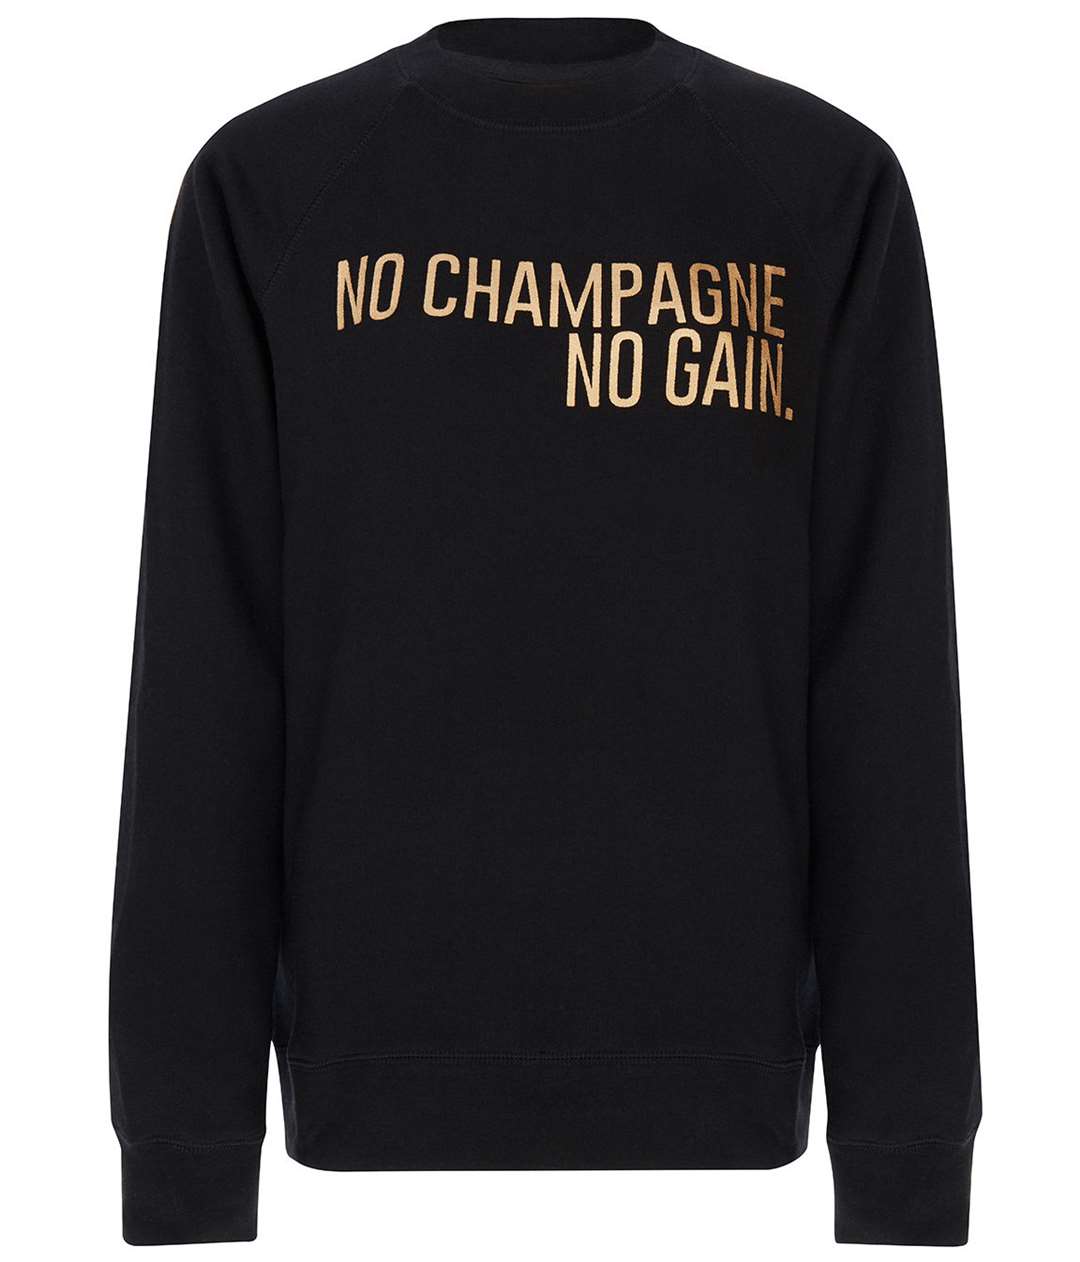 Brunette the Label No Champagne, No Gain Sweatshirt, £59, available from Fashercise